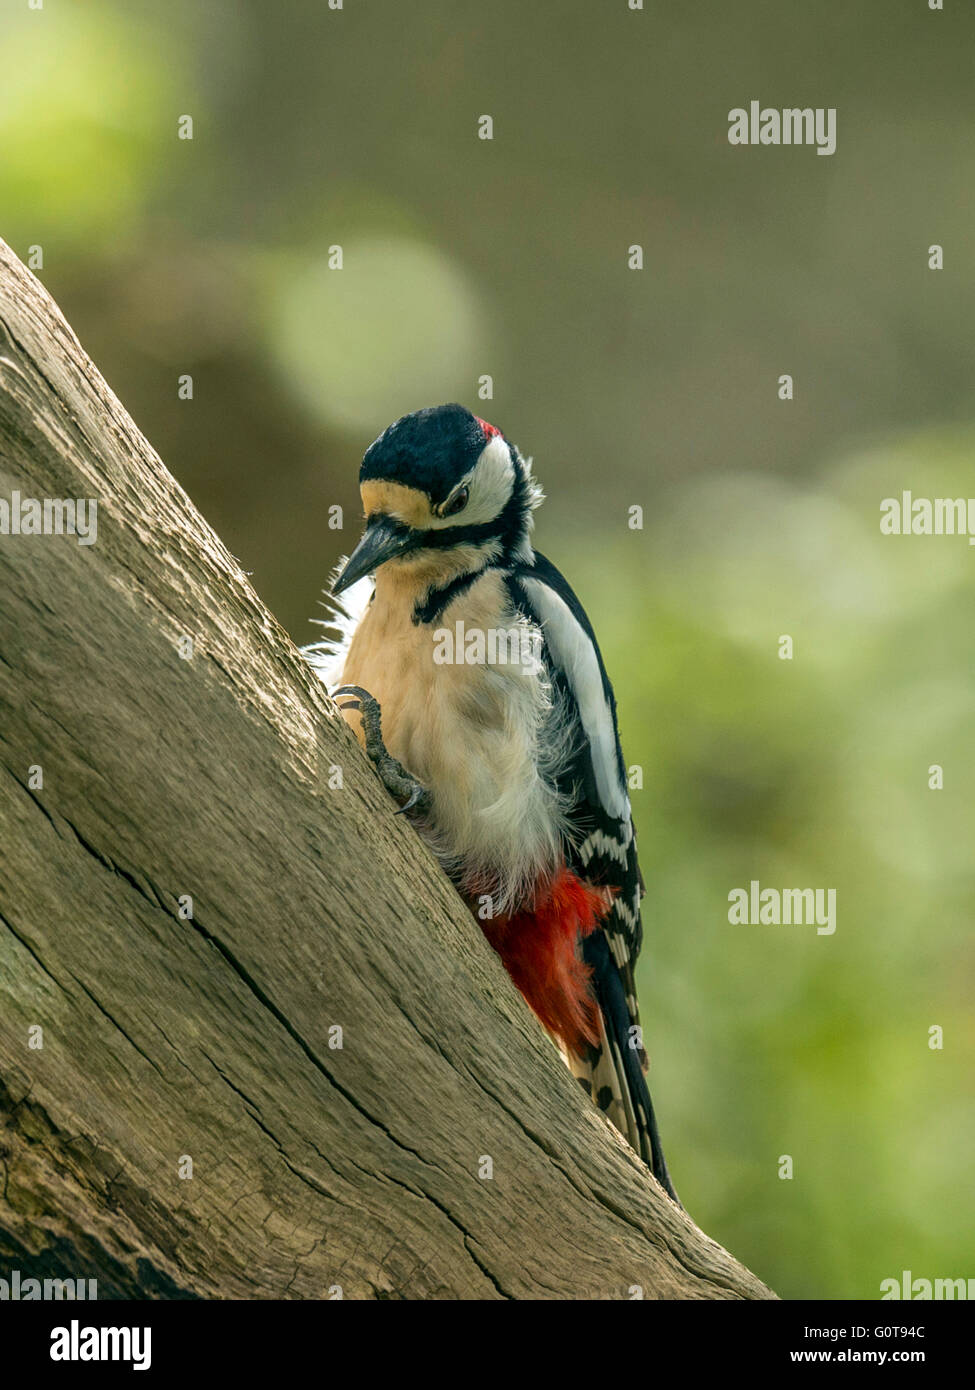 Male Great Spotted Woodpecker (Dendrocopos major) foraging in natural woodland setting. Perched, isolated against background. Stock Photo